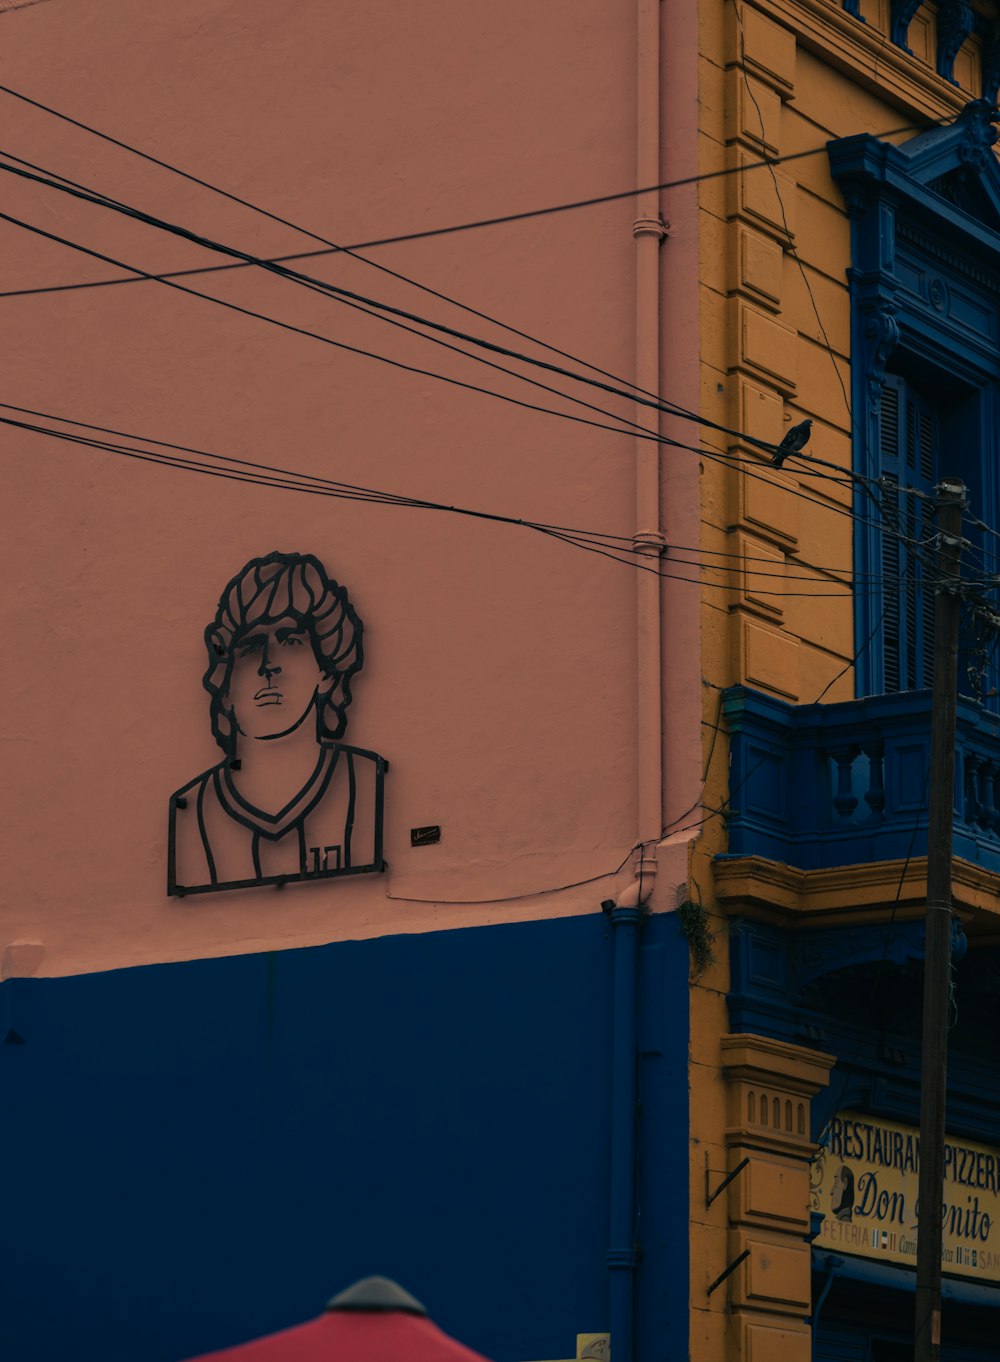 a drawing of a woman on the side of a building